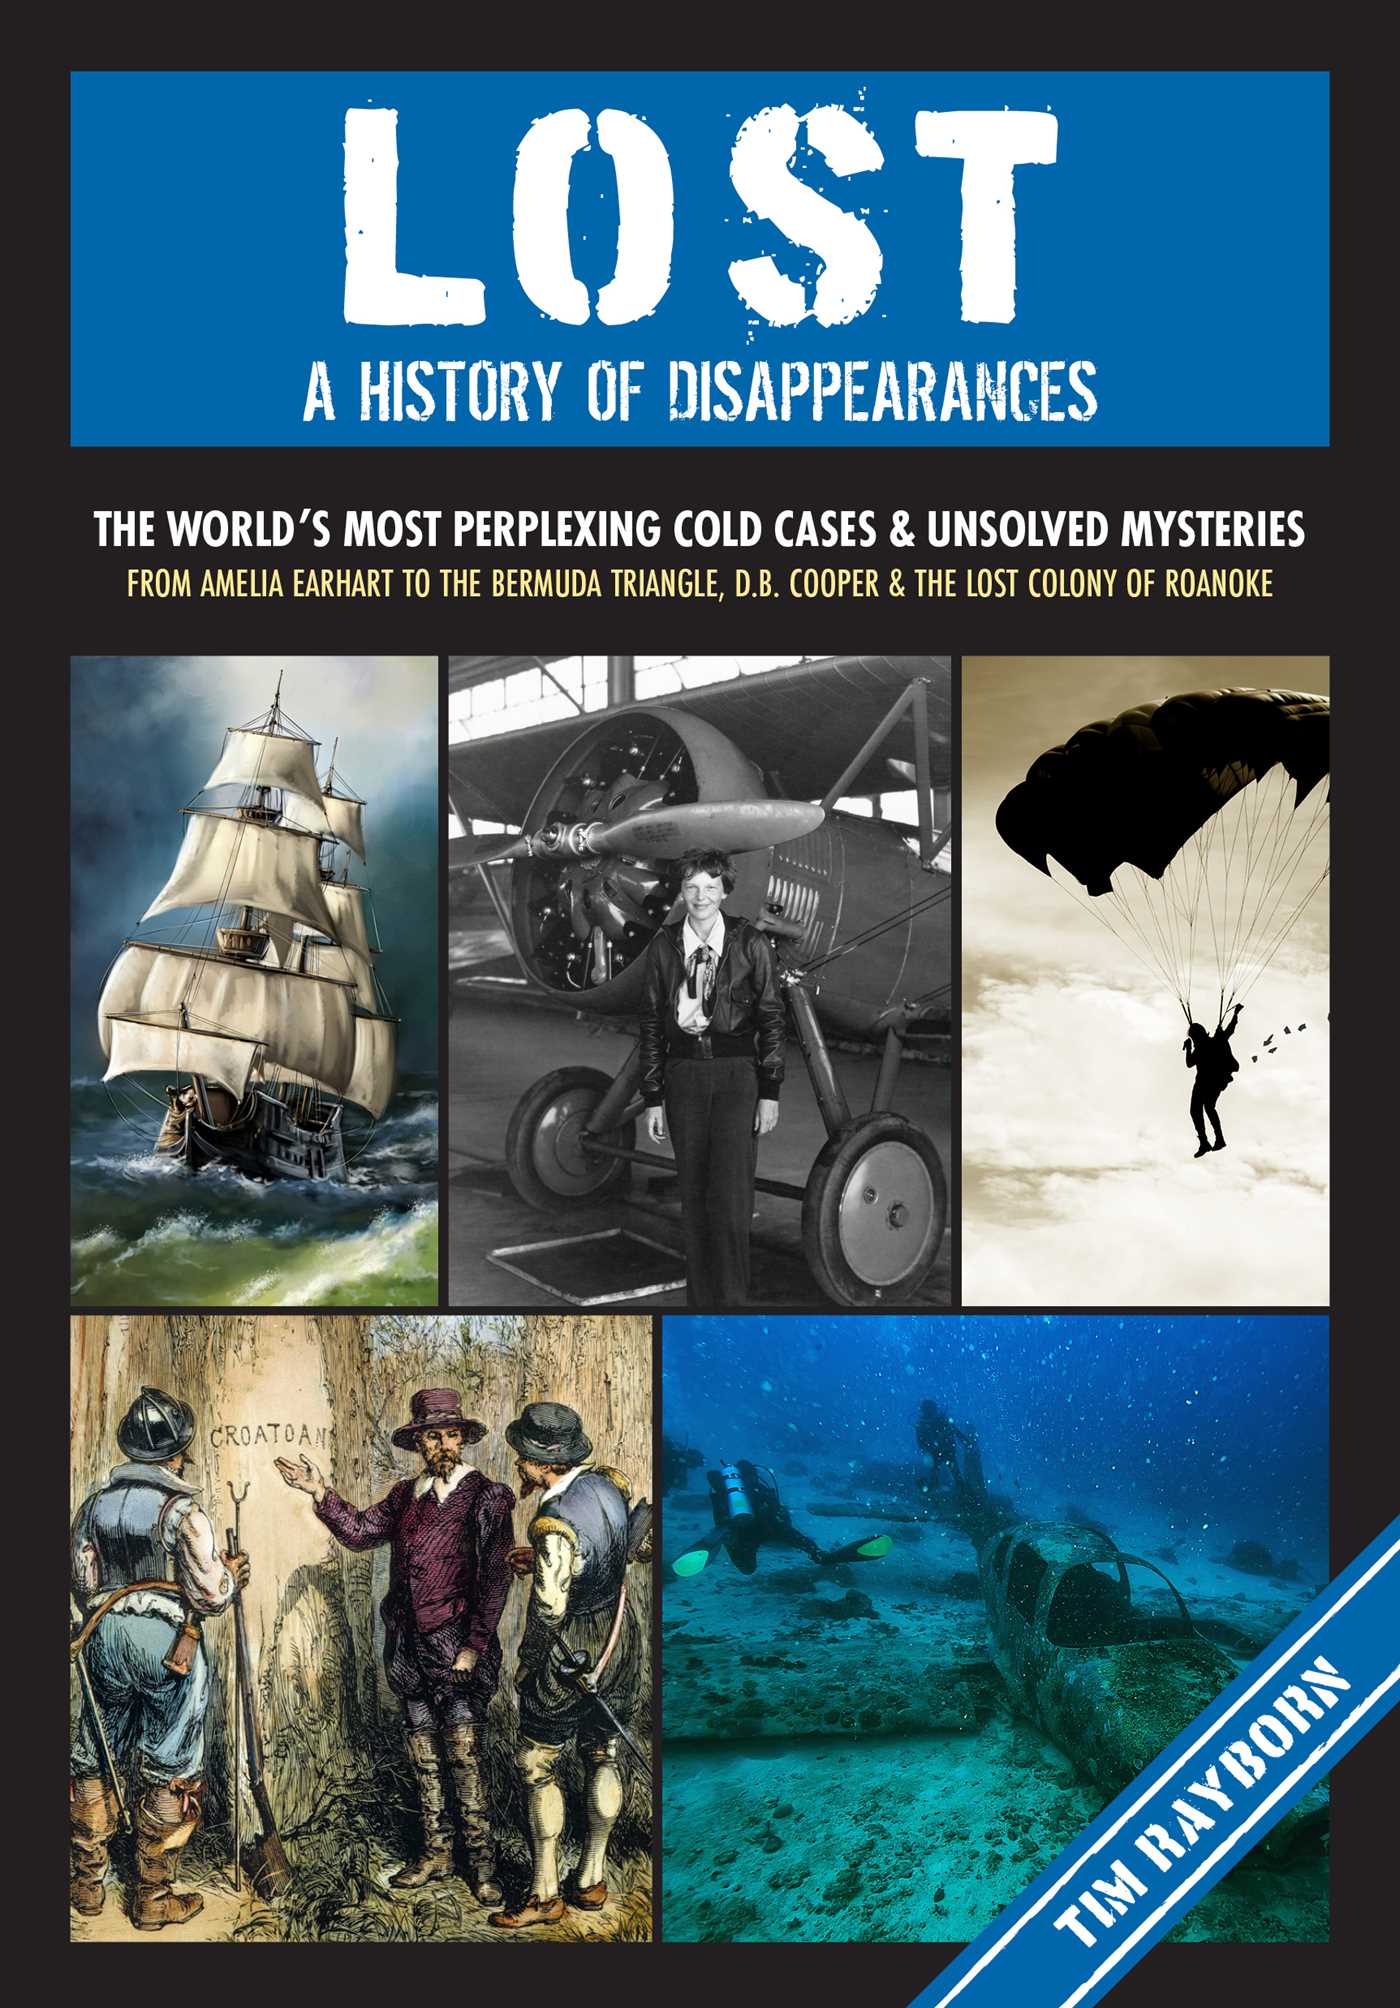 Lost: A History of Disappearances